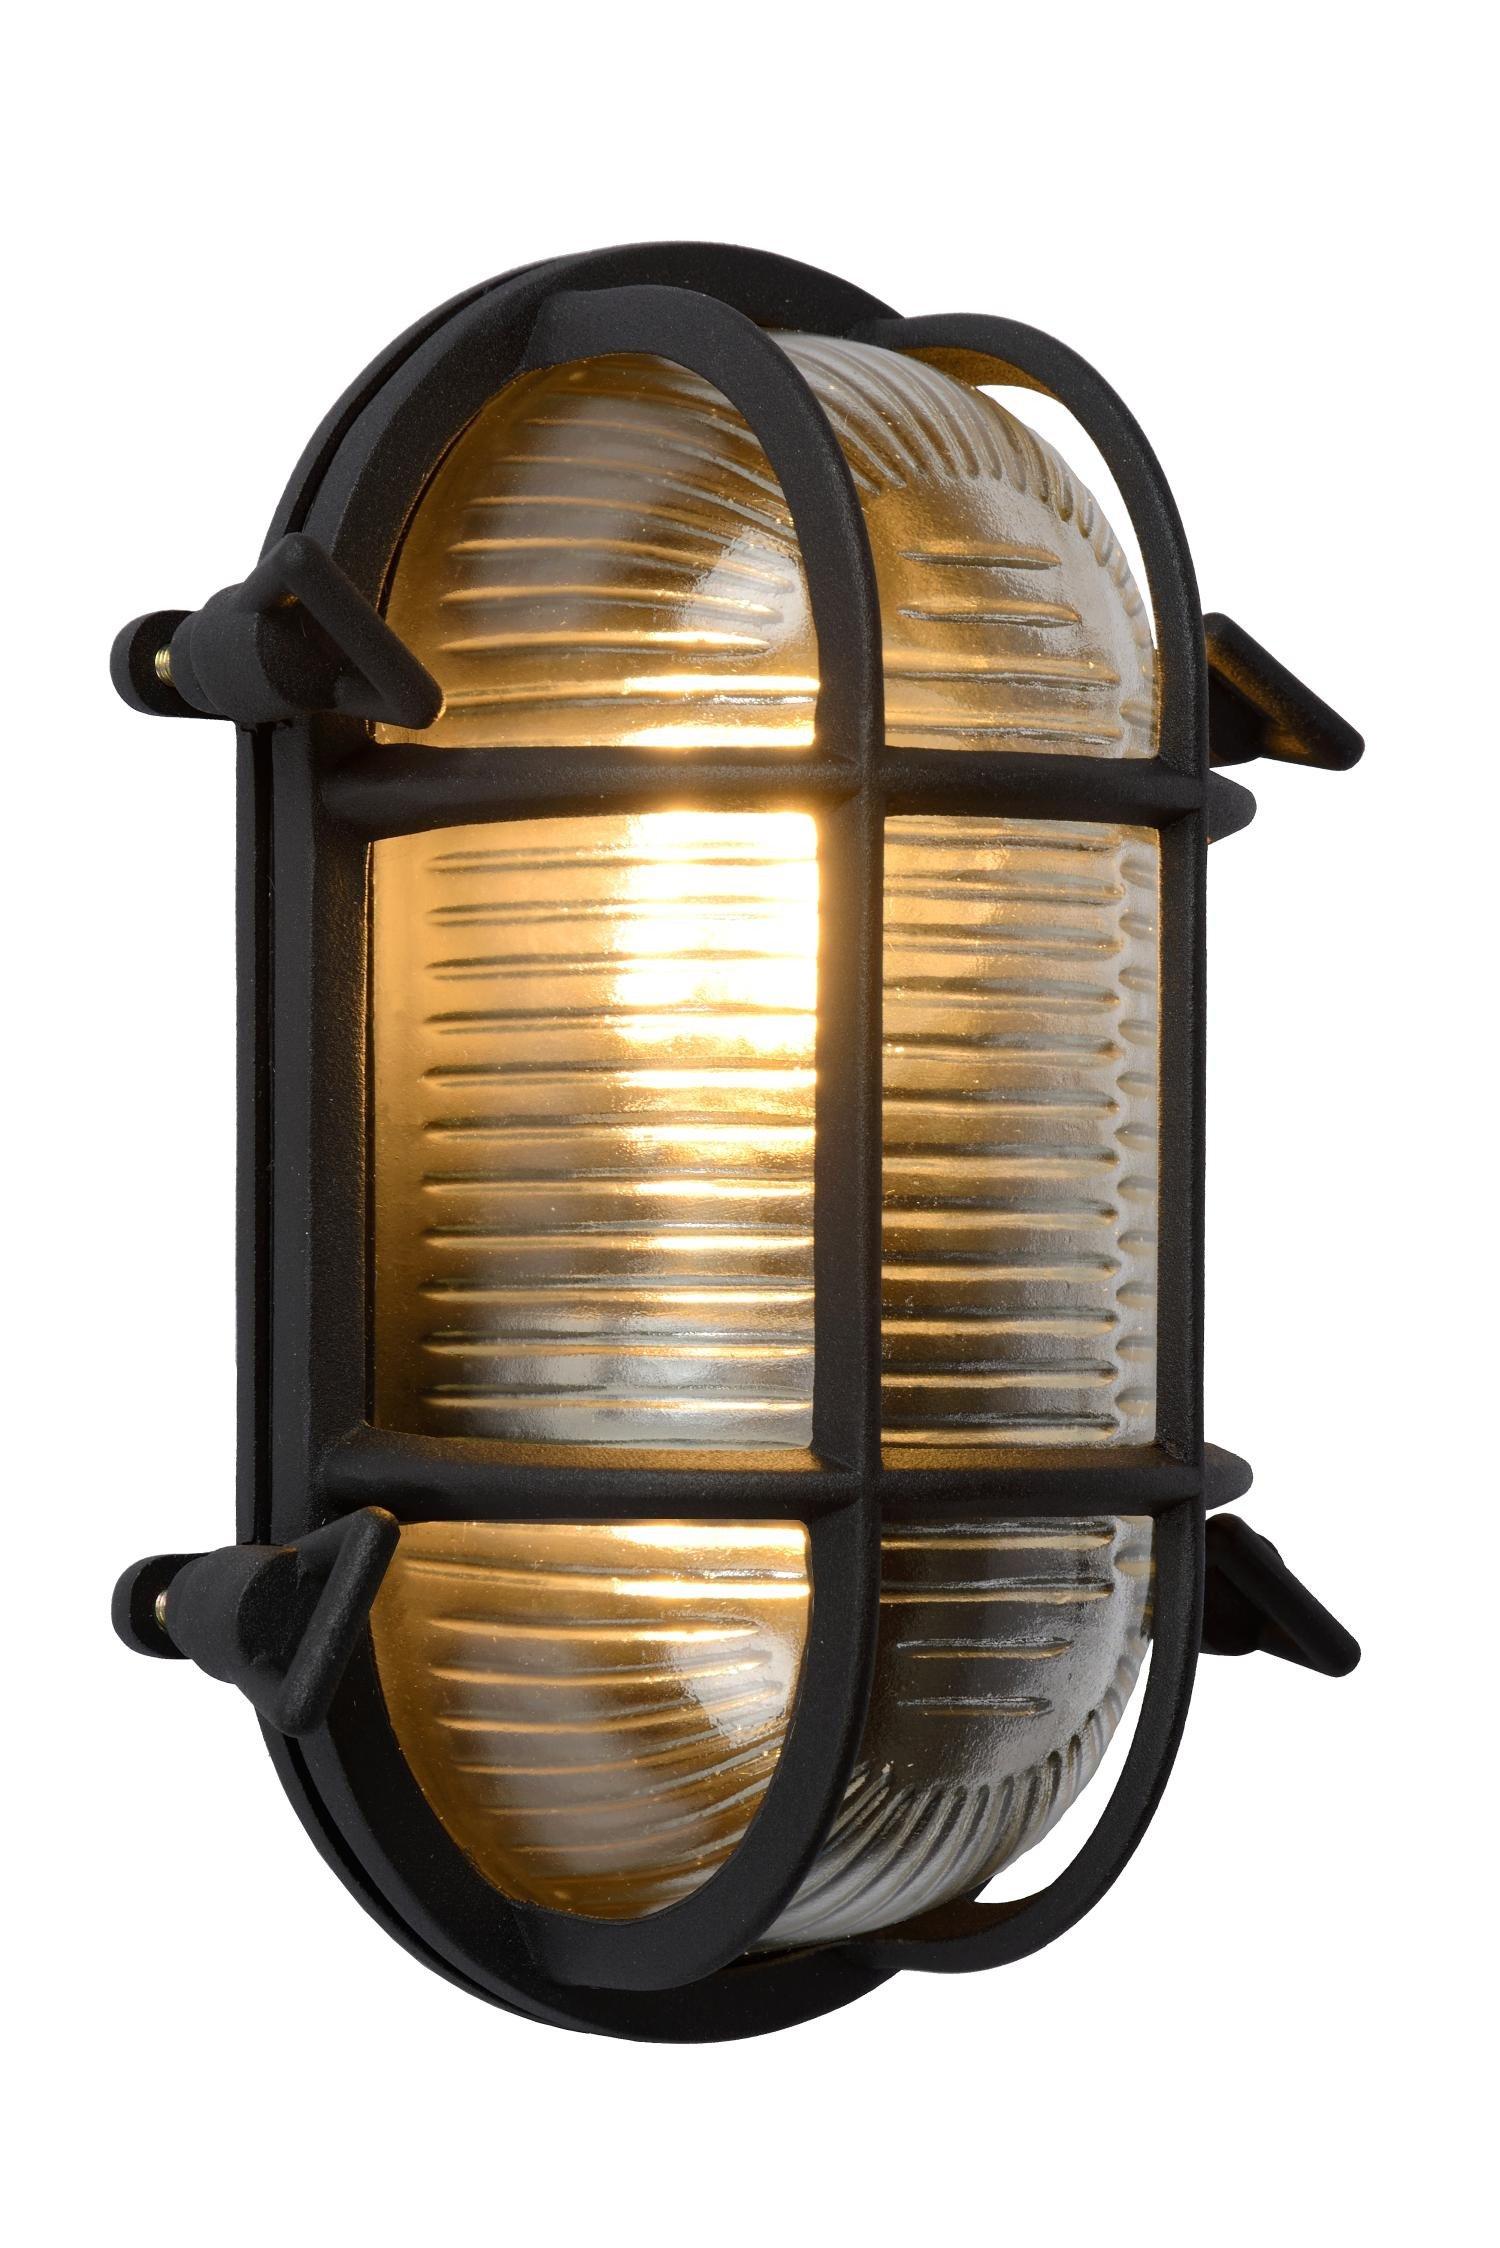 Lucide Dudley Retro Oval Bulkhead Wall Light Outdoor 1xE27 IP65 Black